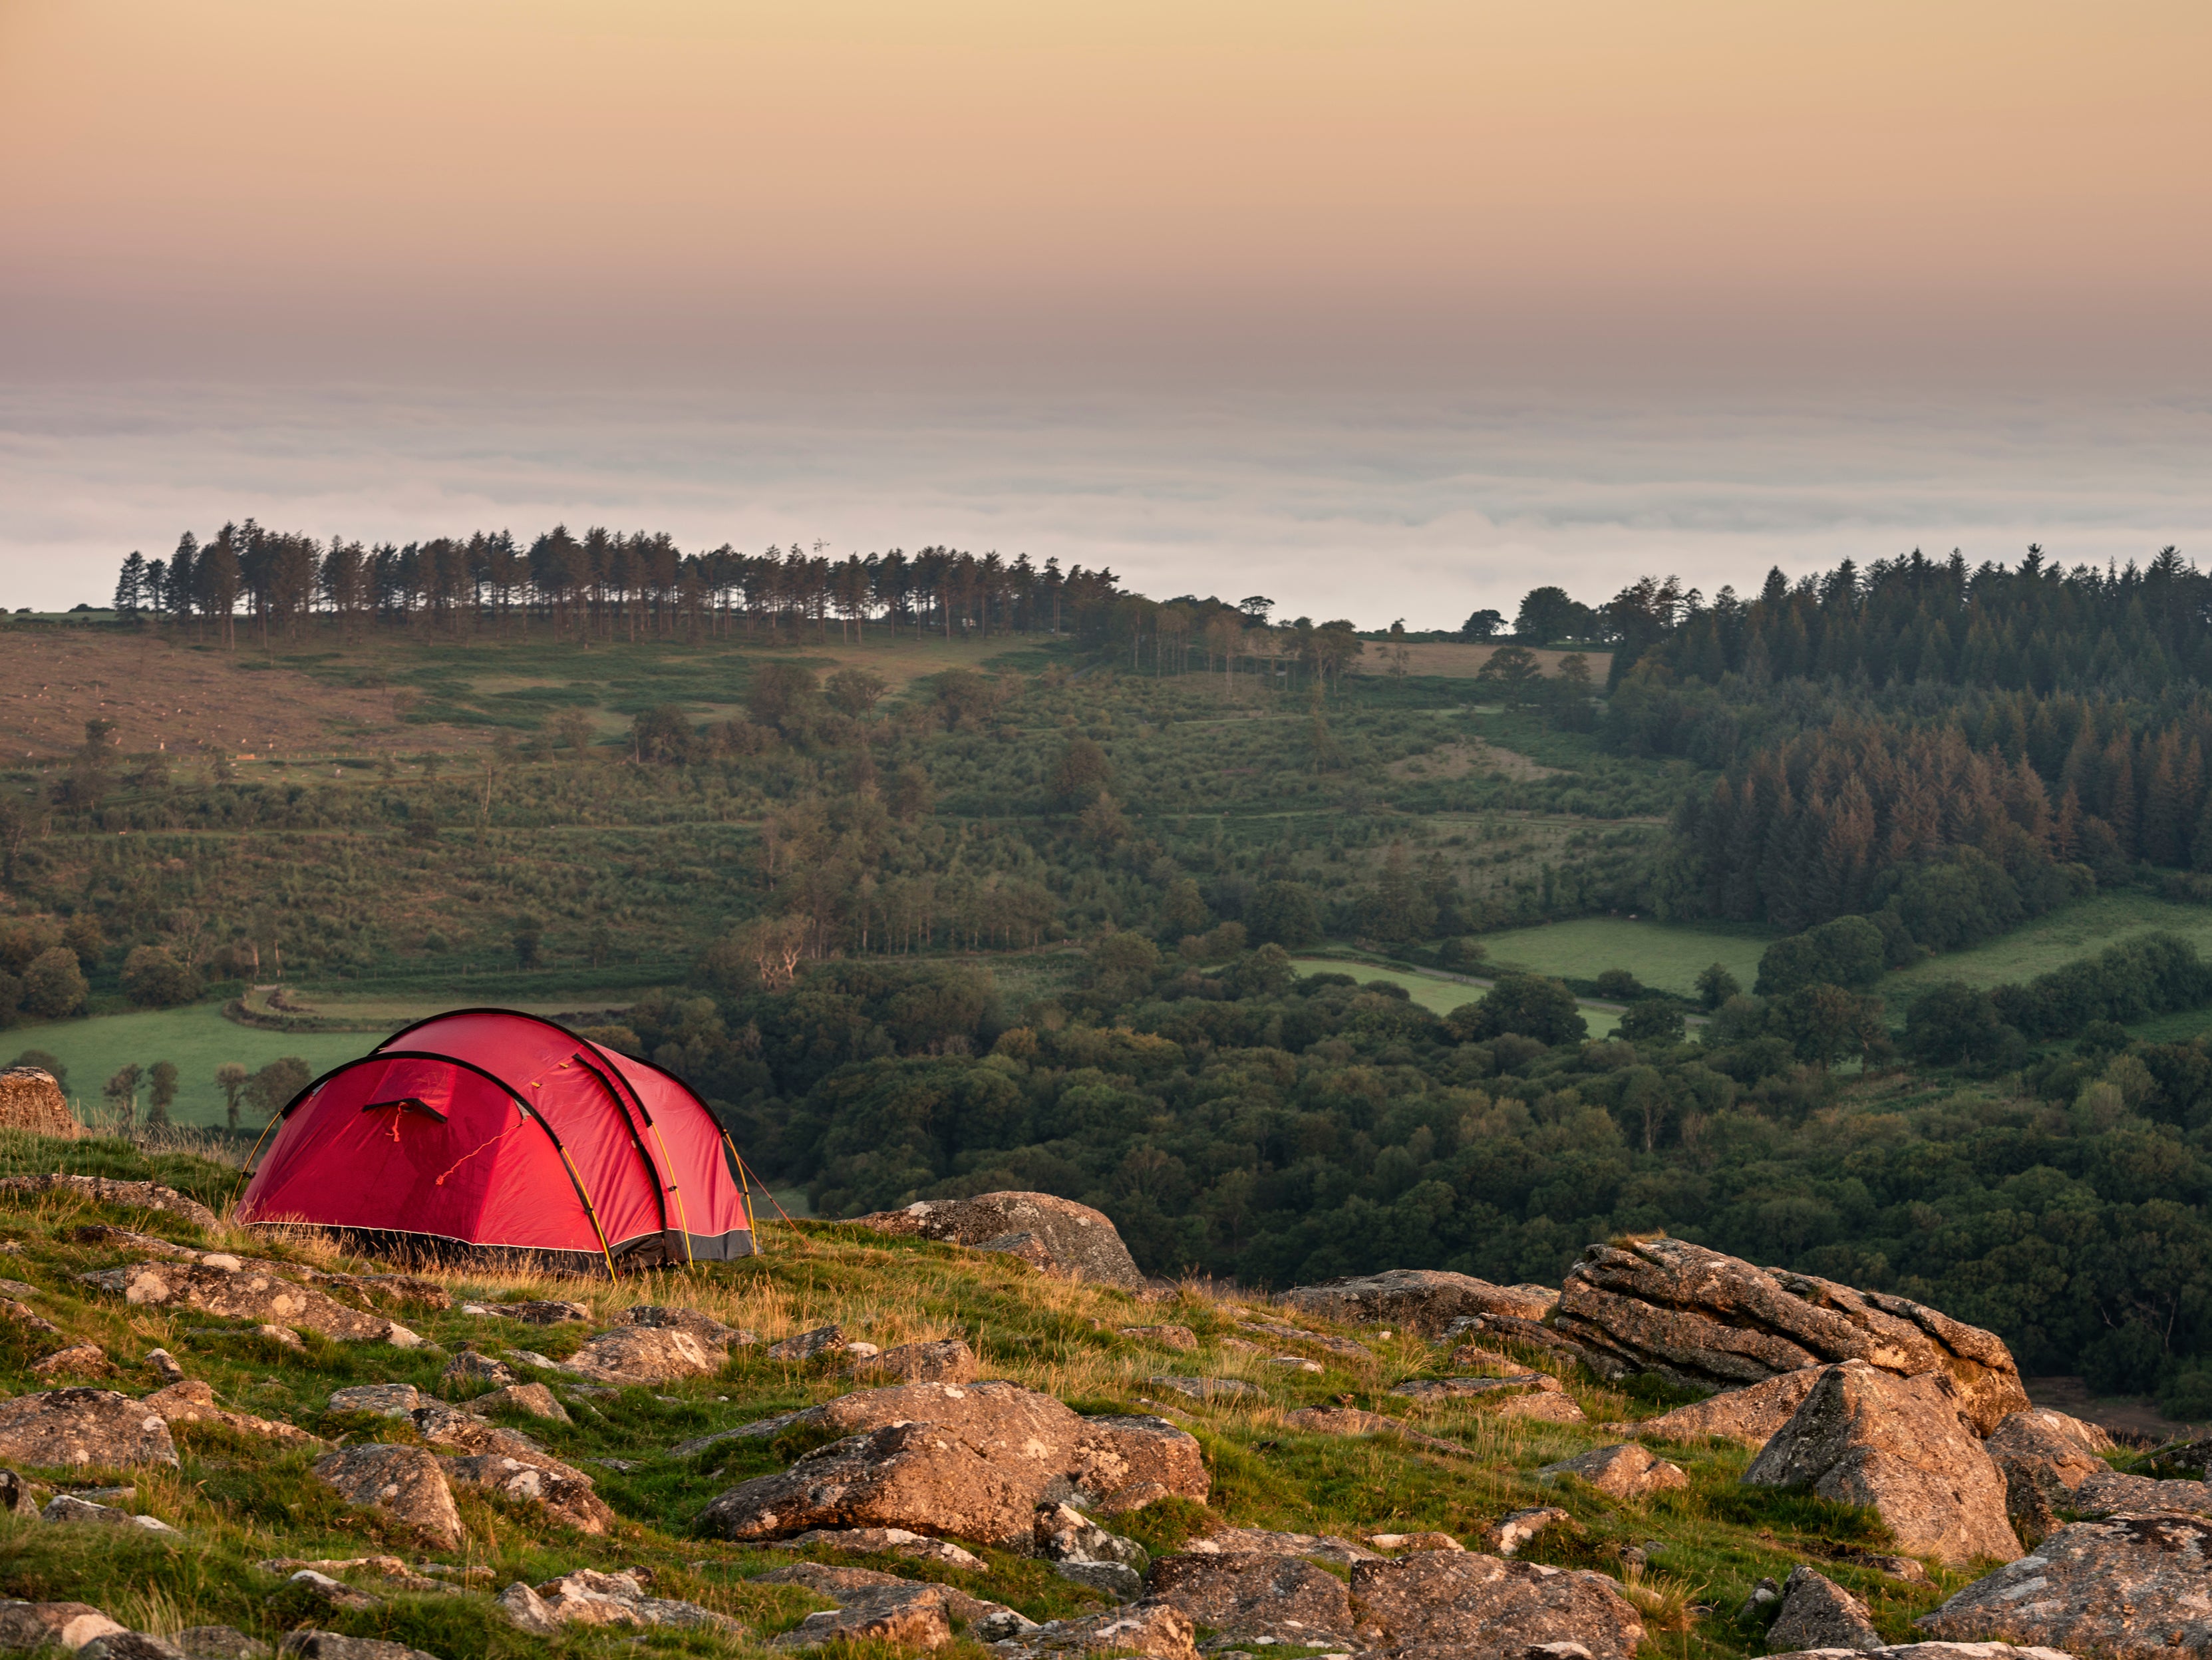 A controversial ban on camping in Dartmoor has been lifted